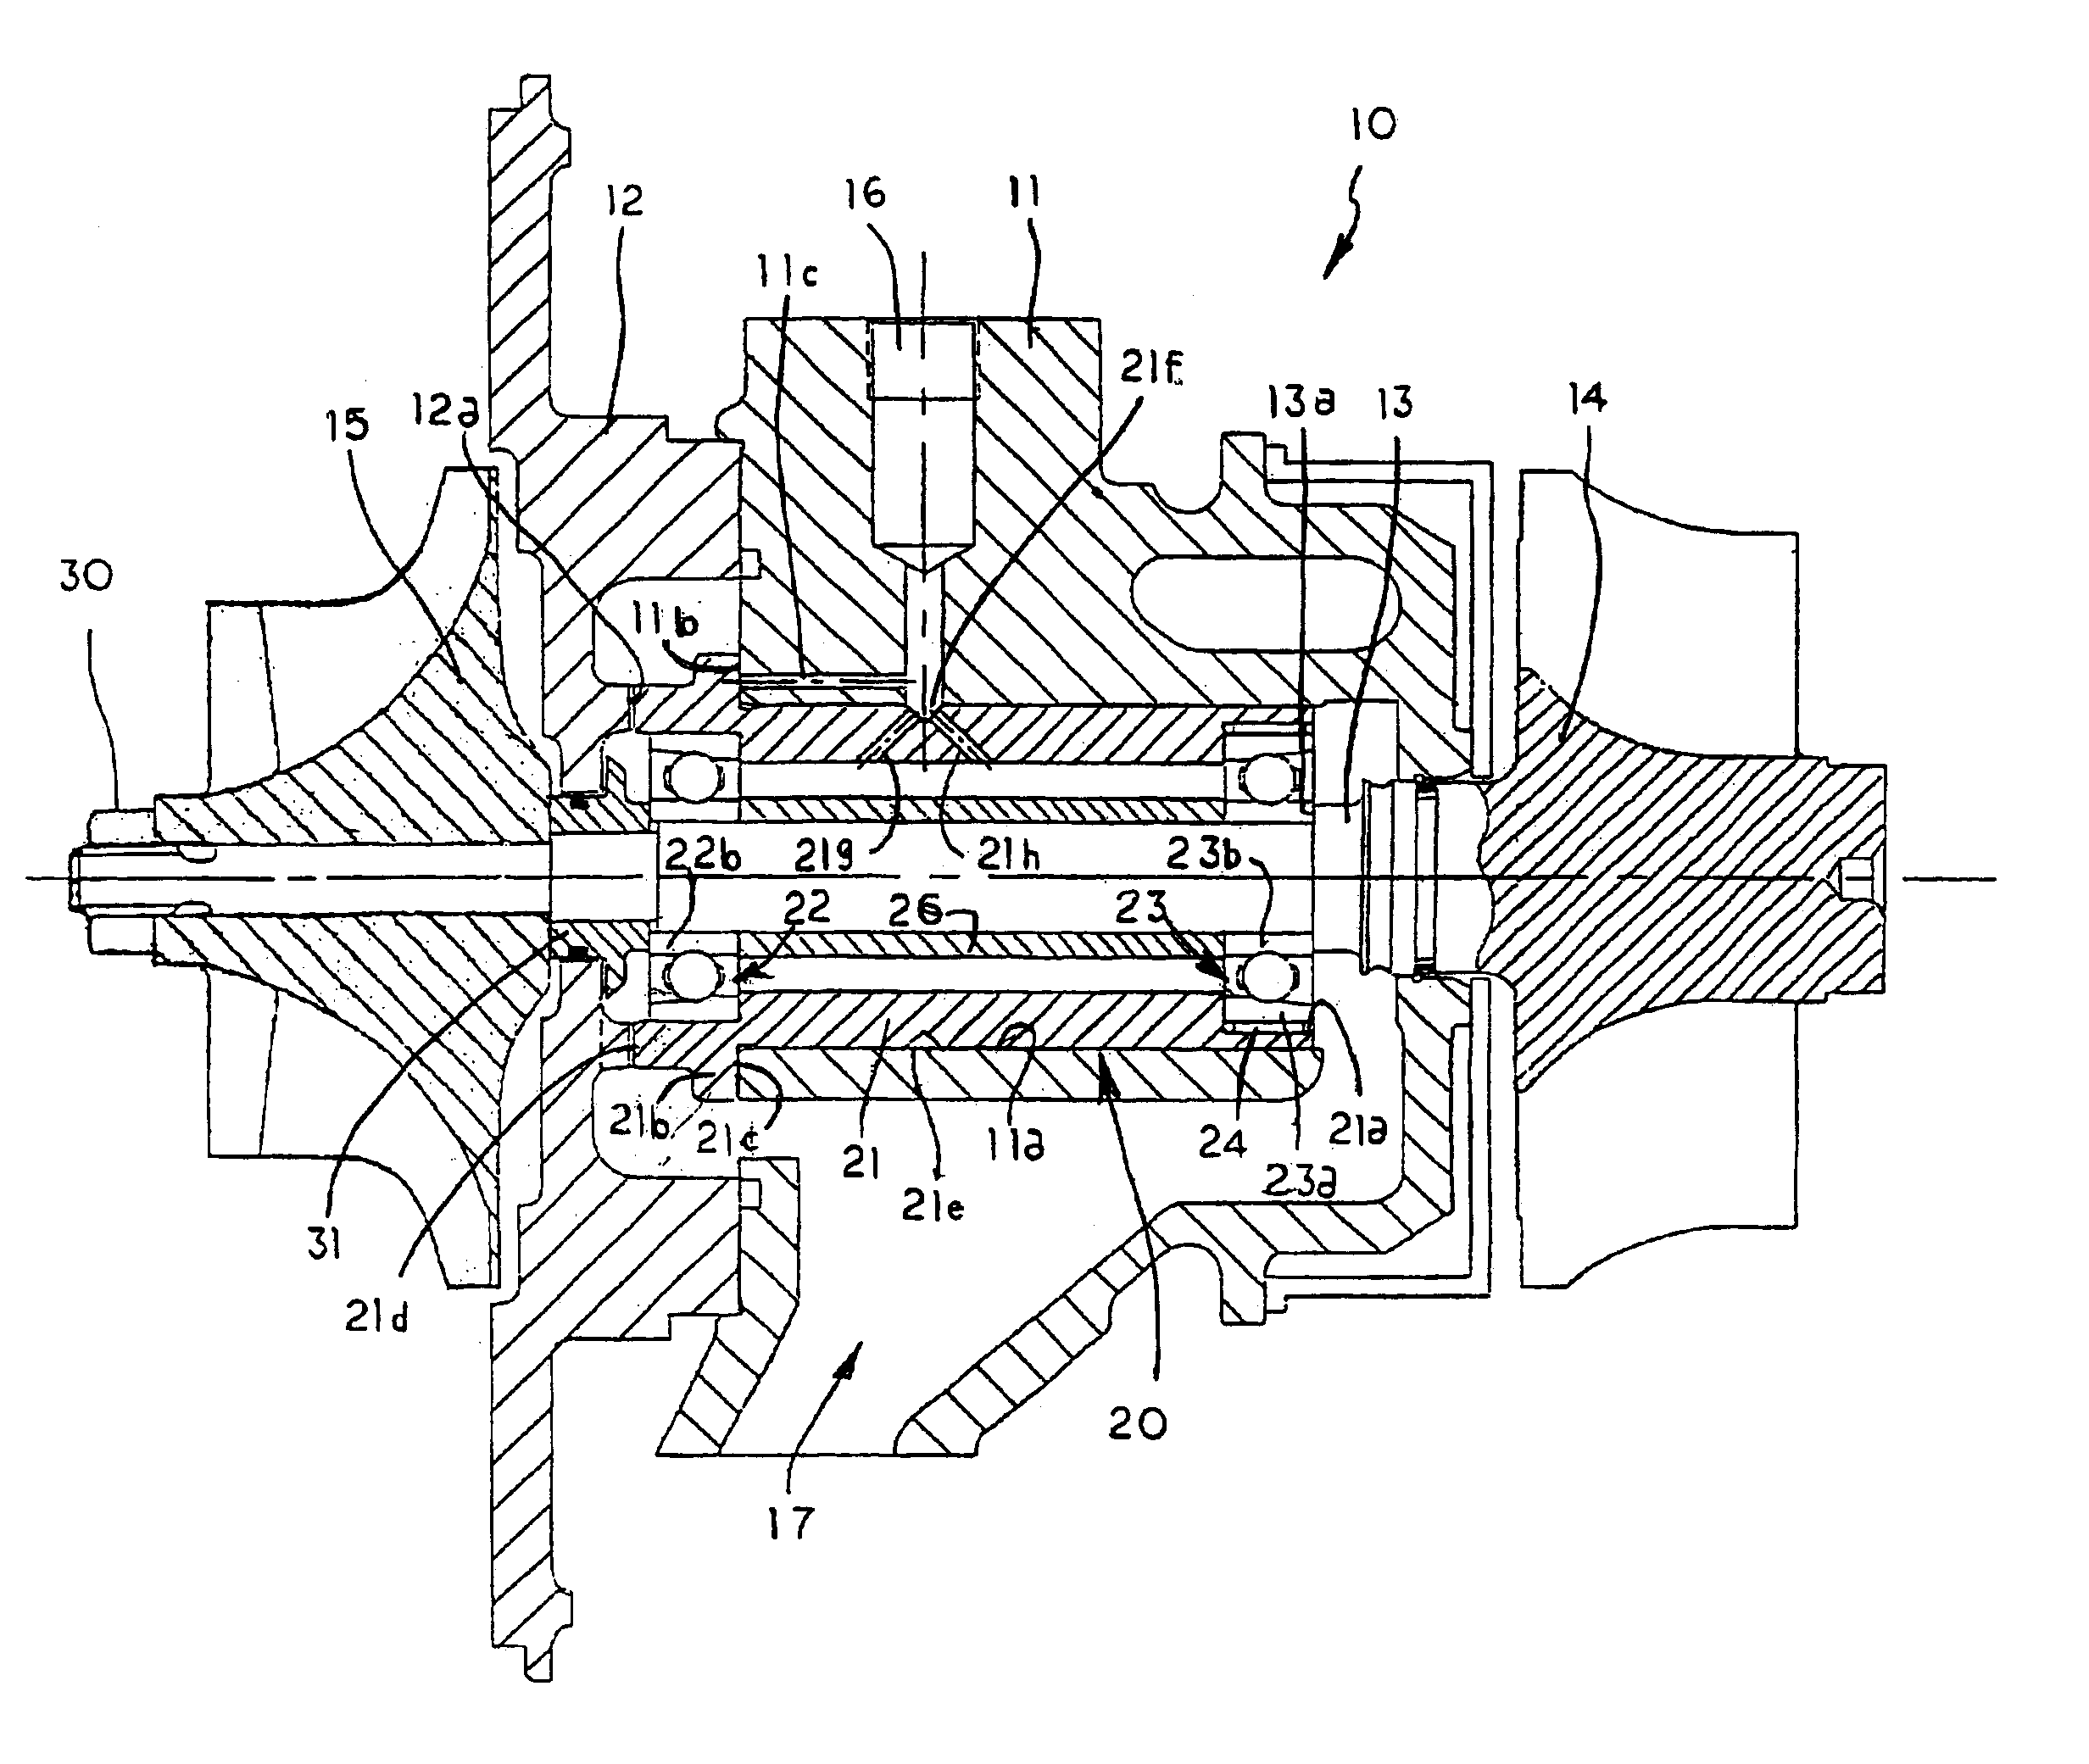 Bearing system for high-speed rotating machinery